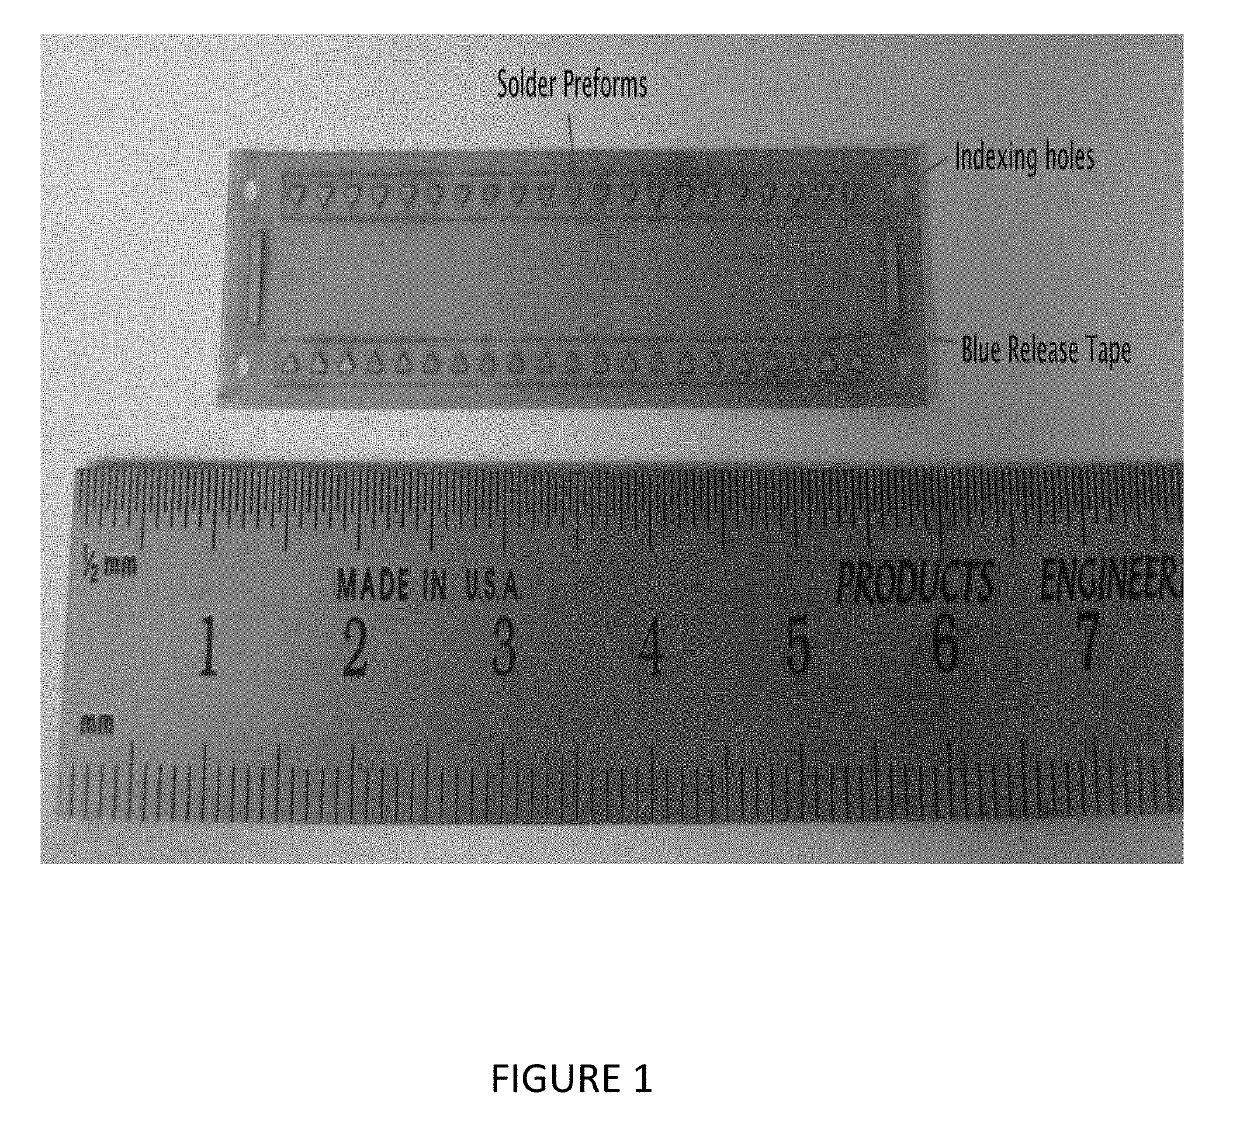 Precise Alignment and Decal Bonding of a Pattern of Solder Preforms to a Surface